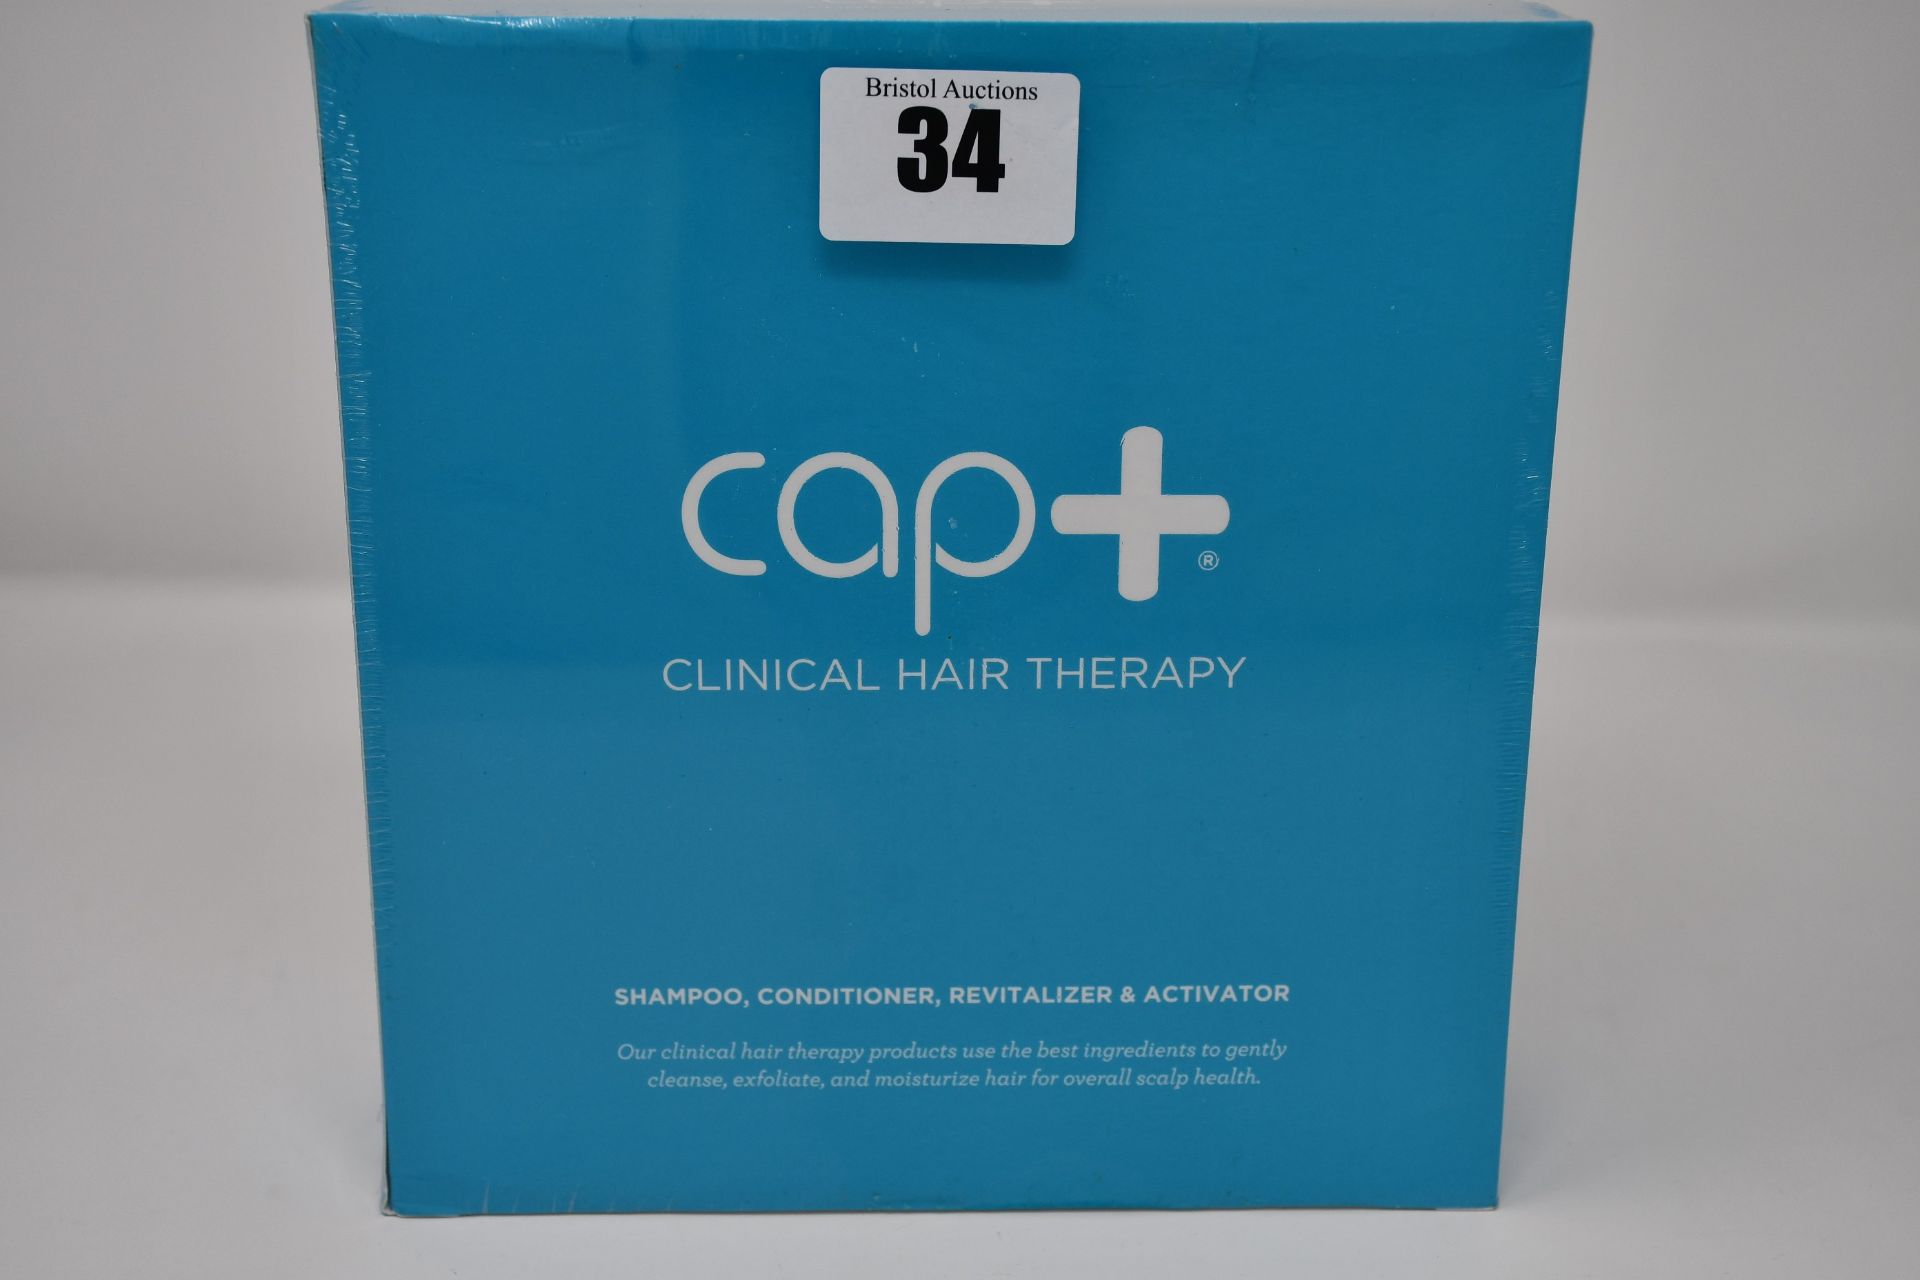 Two boxed as new Capillus cap+ clinical hair therapy bundles (Includes shampoo, conditioner,